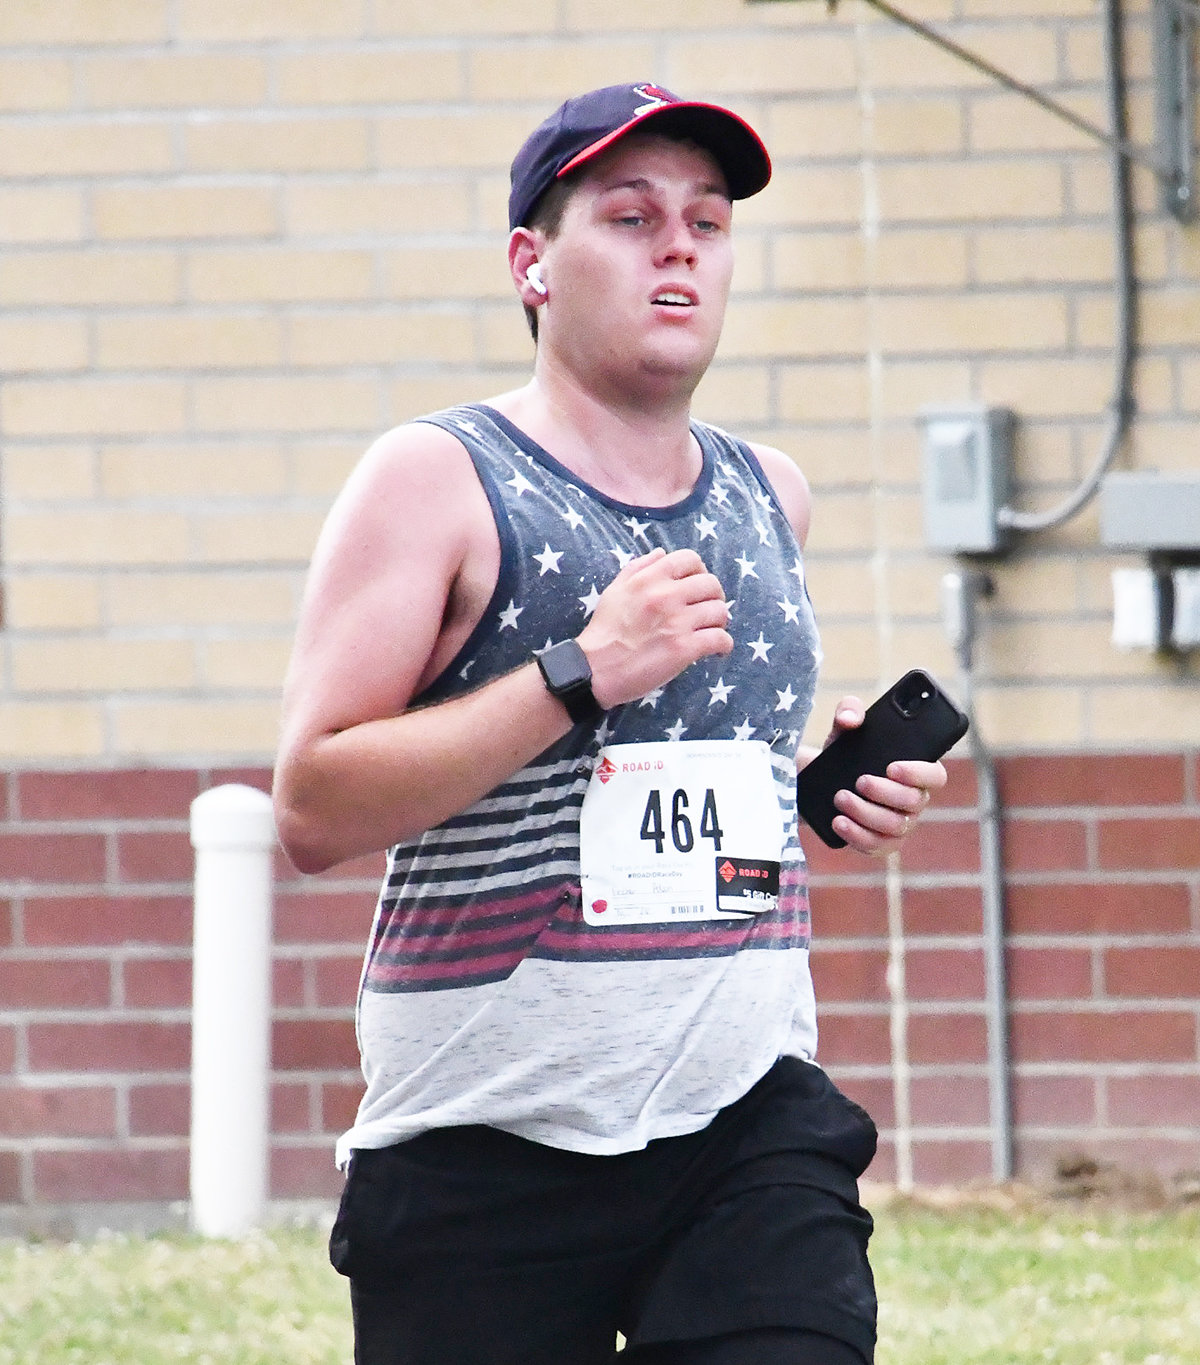 Adam Fincher wore a patriotic tank top while running in the Independence Day 5K run.